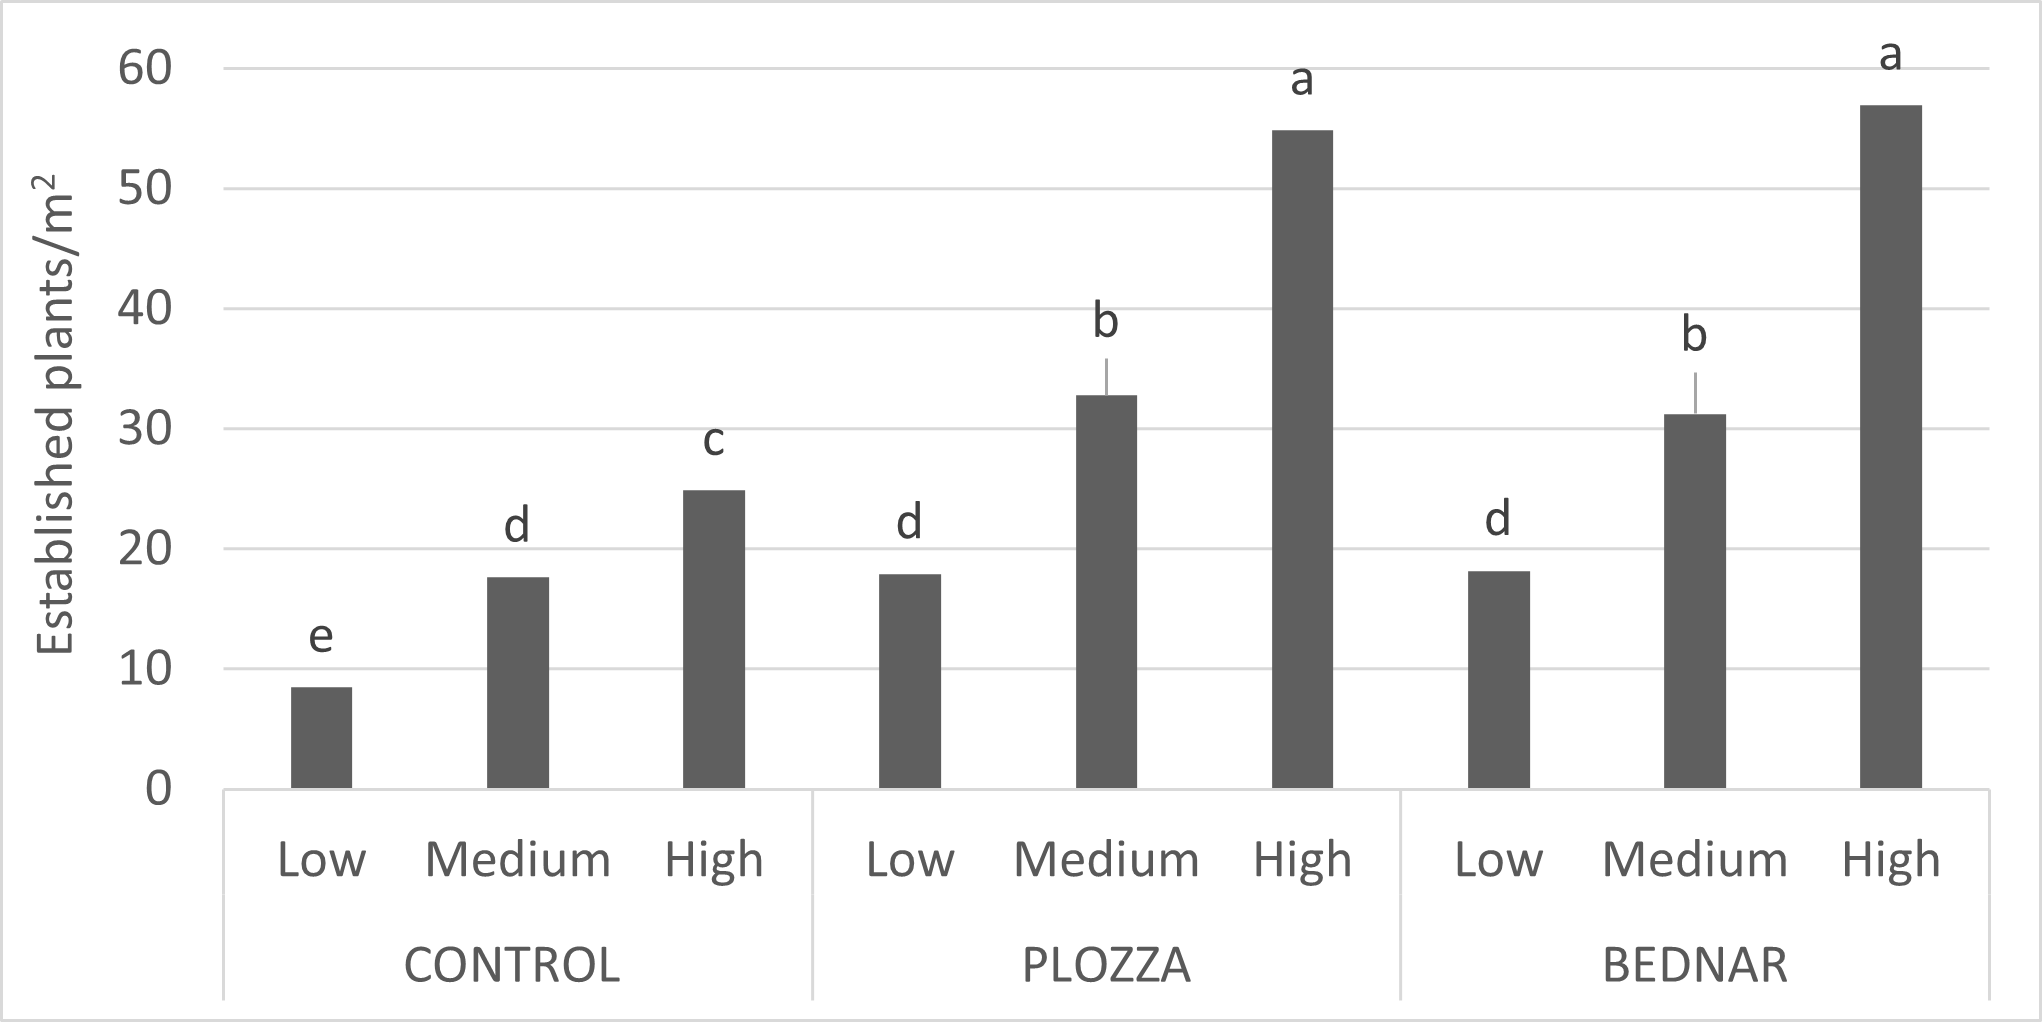 Canola crop establishment at Coomandook in 2023 for each tillage type and sowing rate (low=1.6kg/ha, medium=2.8kg/ha, high=4kg/ha), showing higher sowing rates are needed to achieve the target plant population (dashed line) when water repellence is present (control). Letters denote significance (p<0.001, Lsd=6.2). 